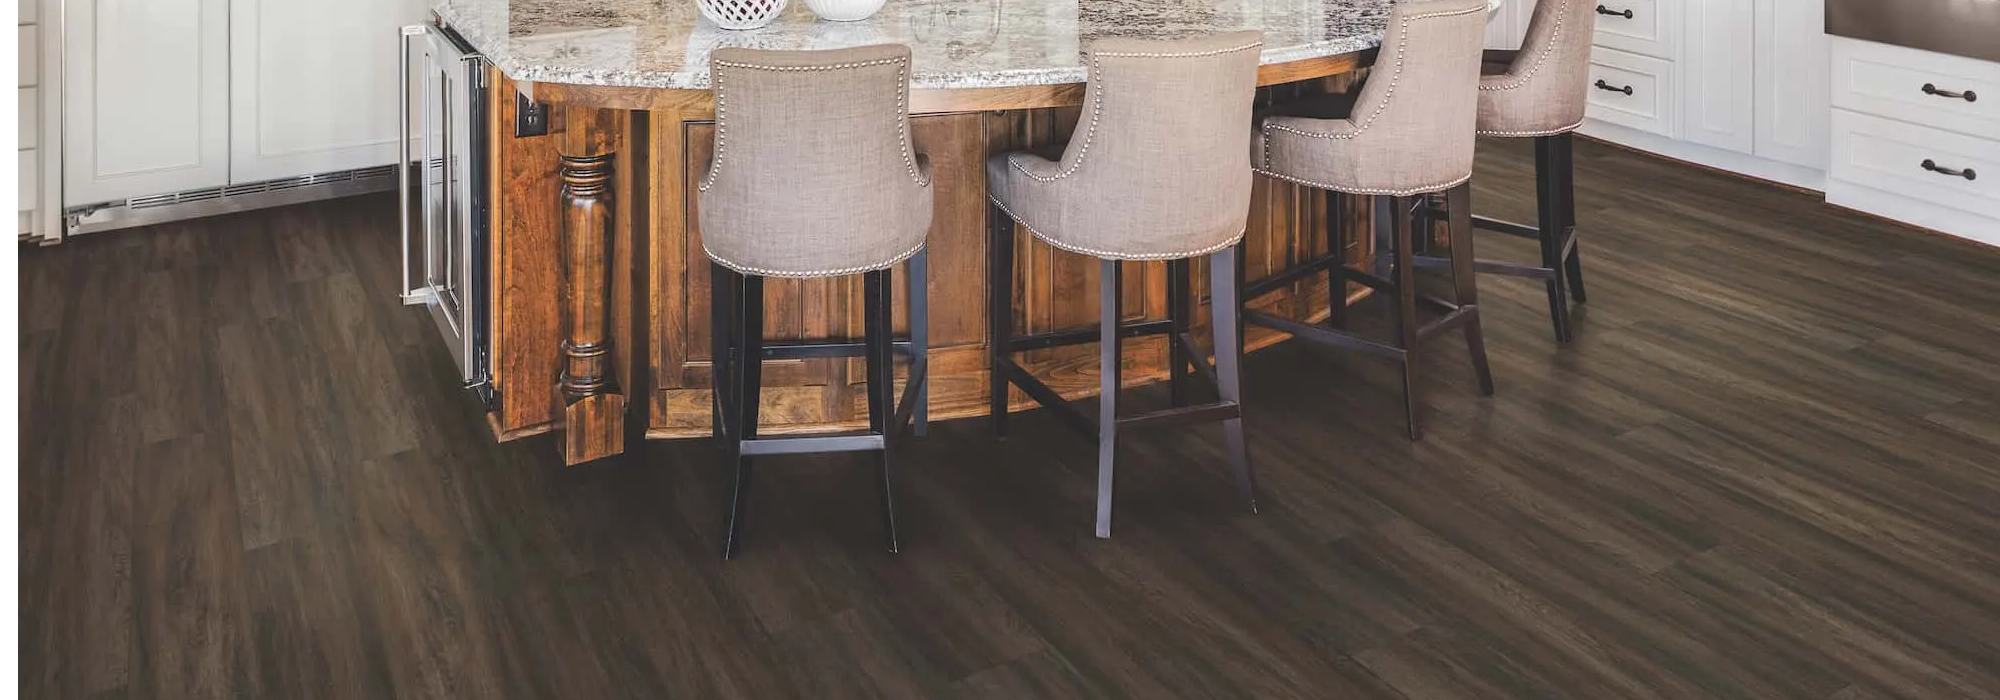 Example of Vinyl flooring for Kitchens